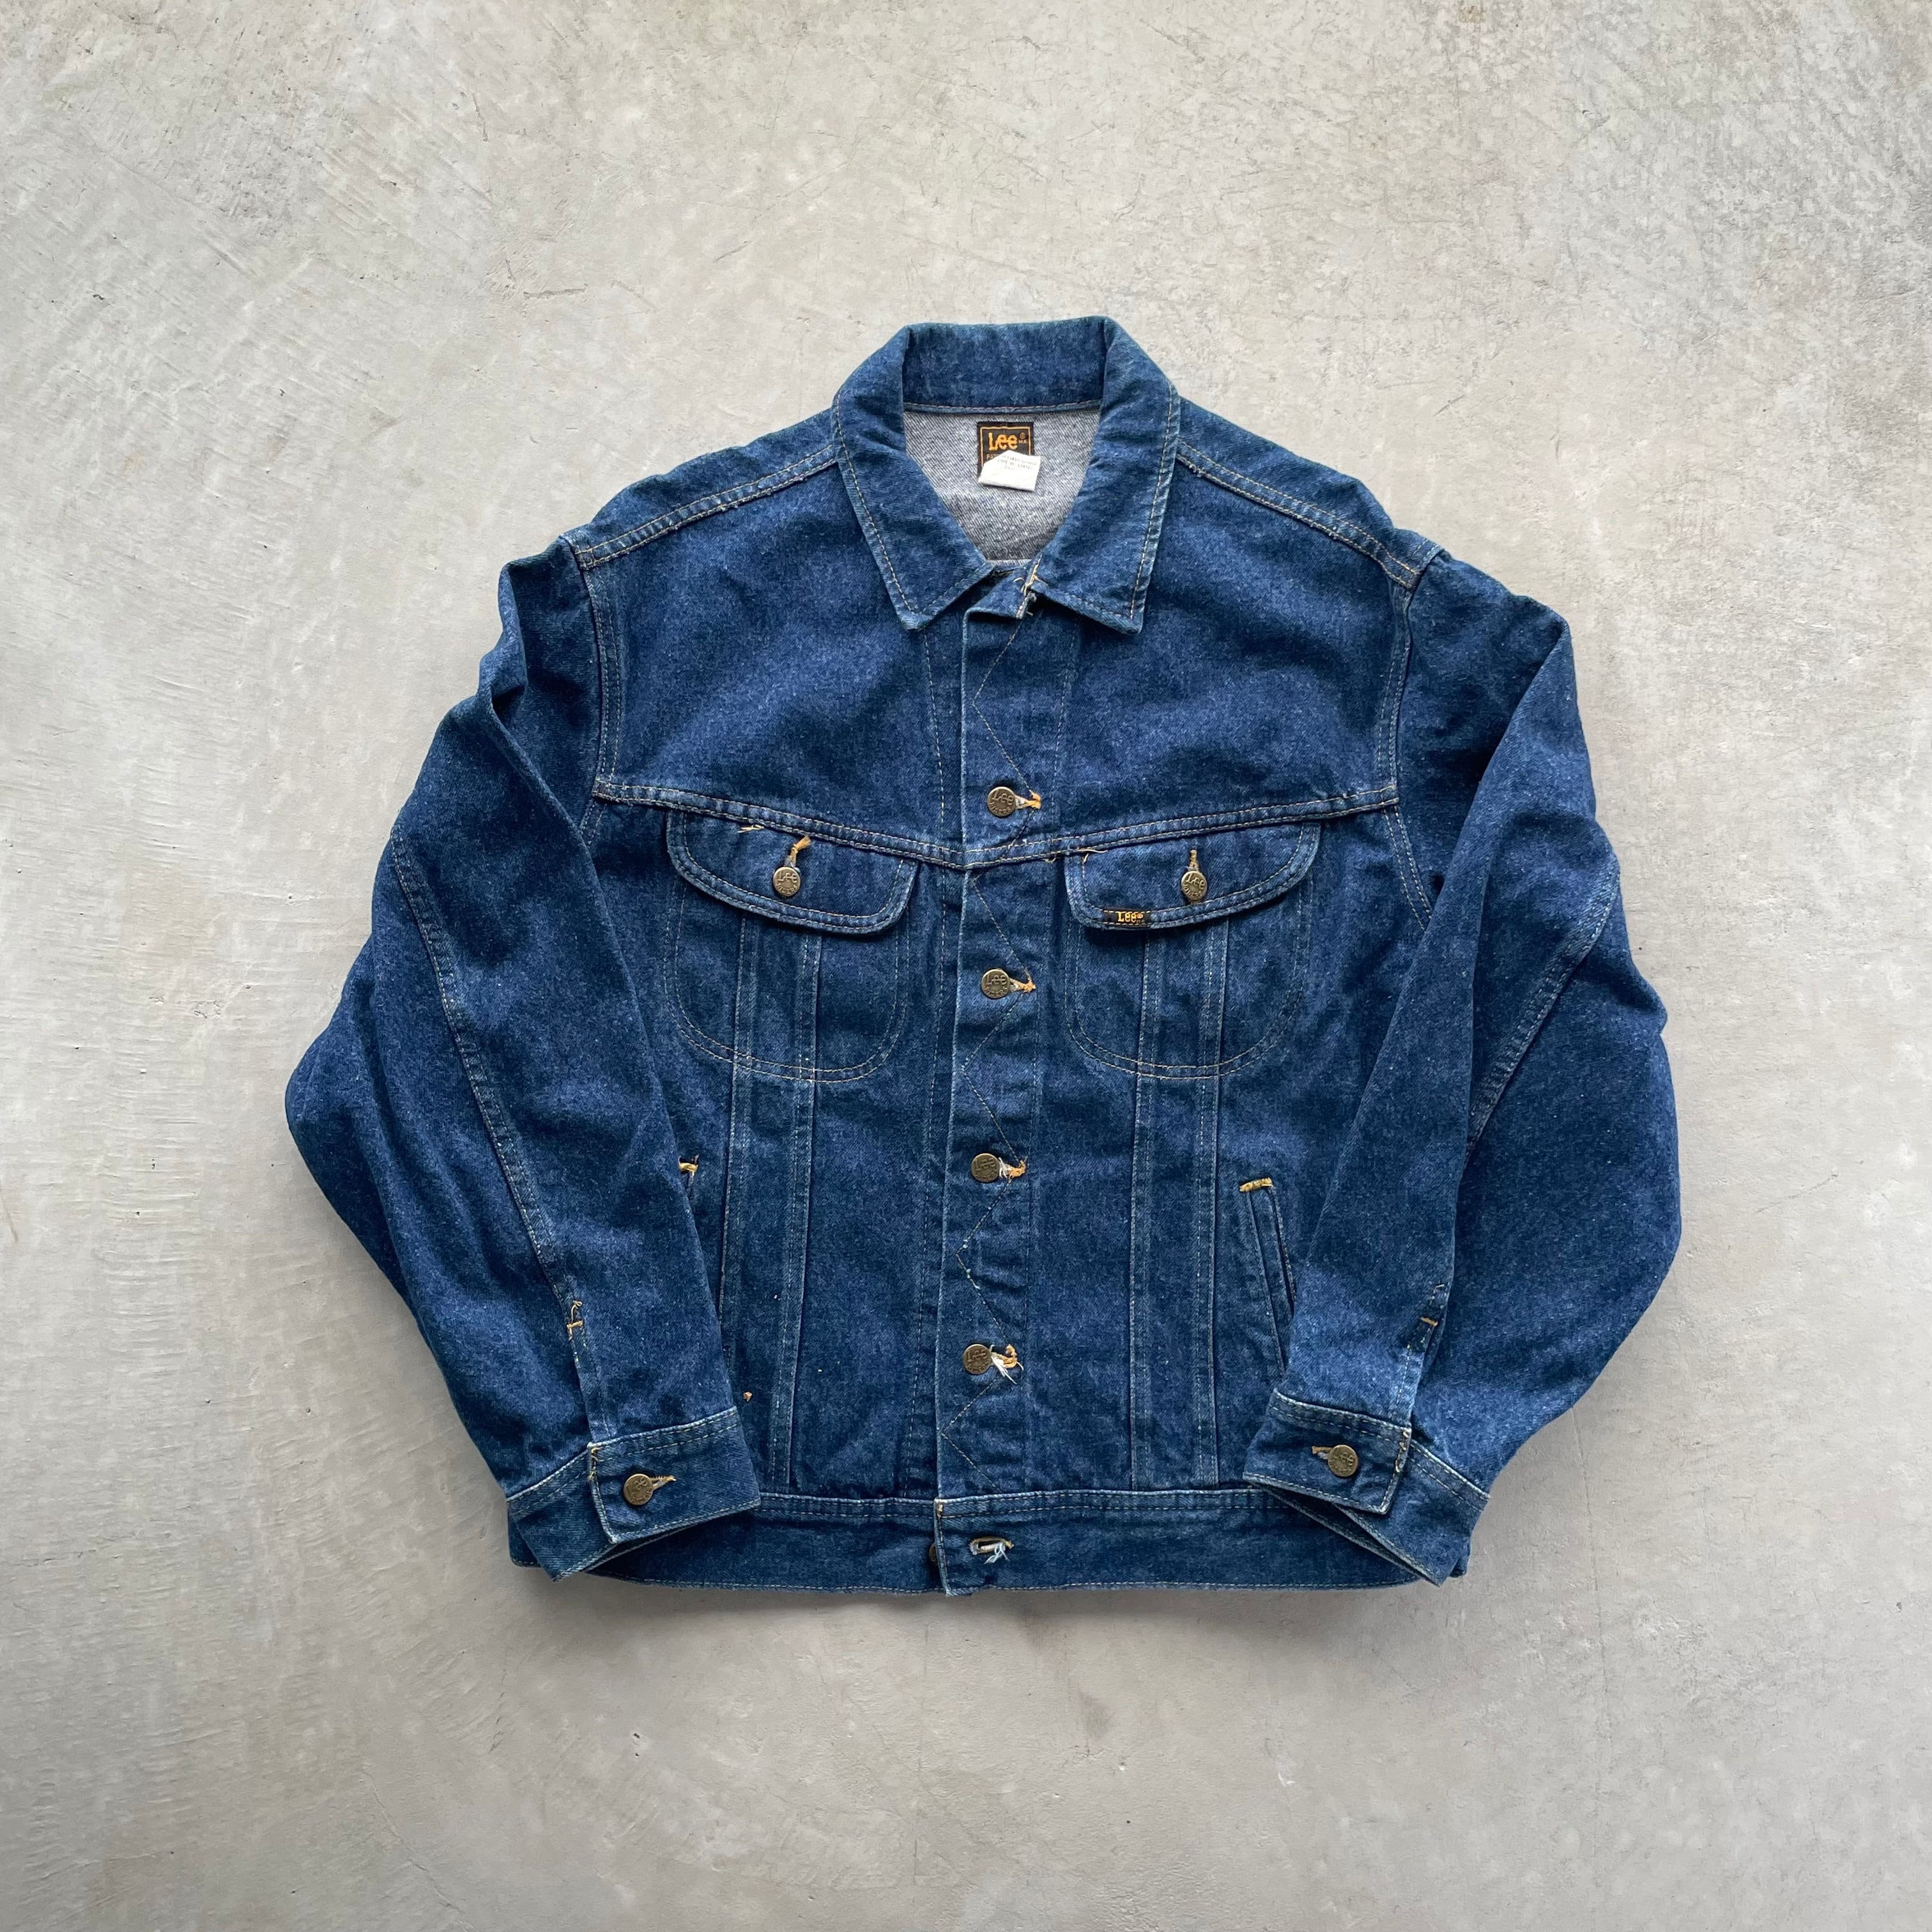 Levi's/90s 70506-0217 denim jacket made in USA リーバイス アメリカ 